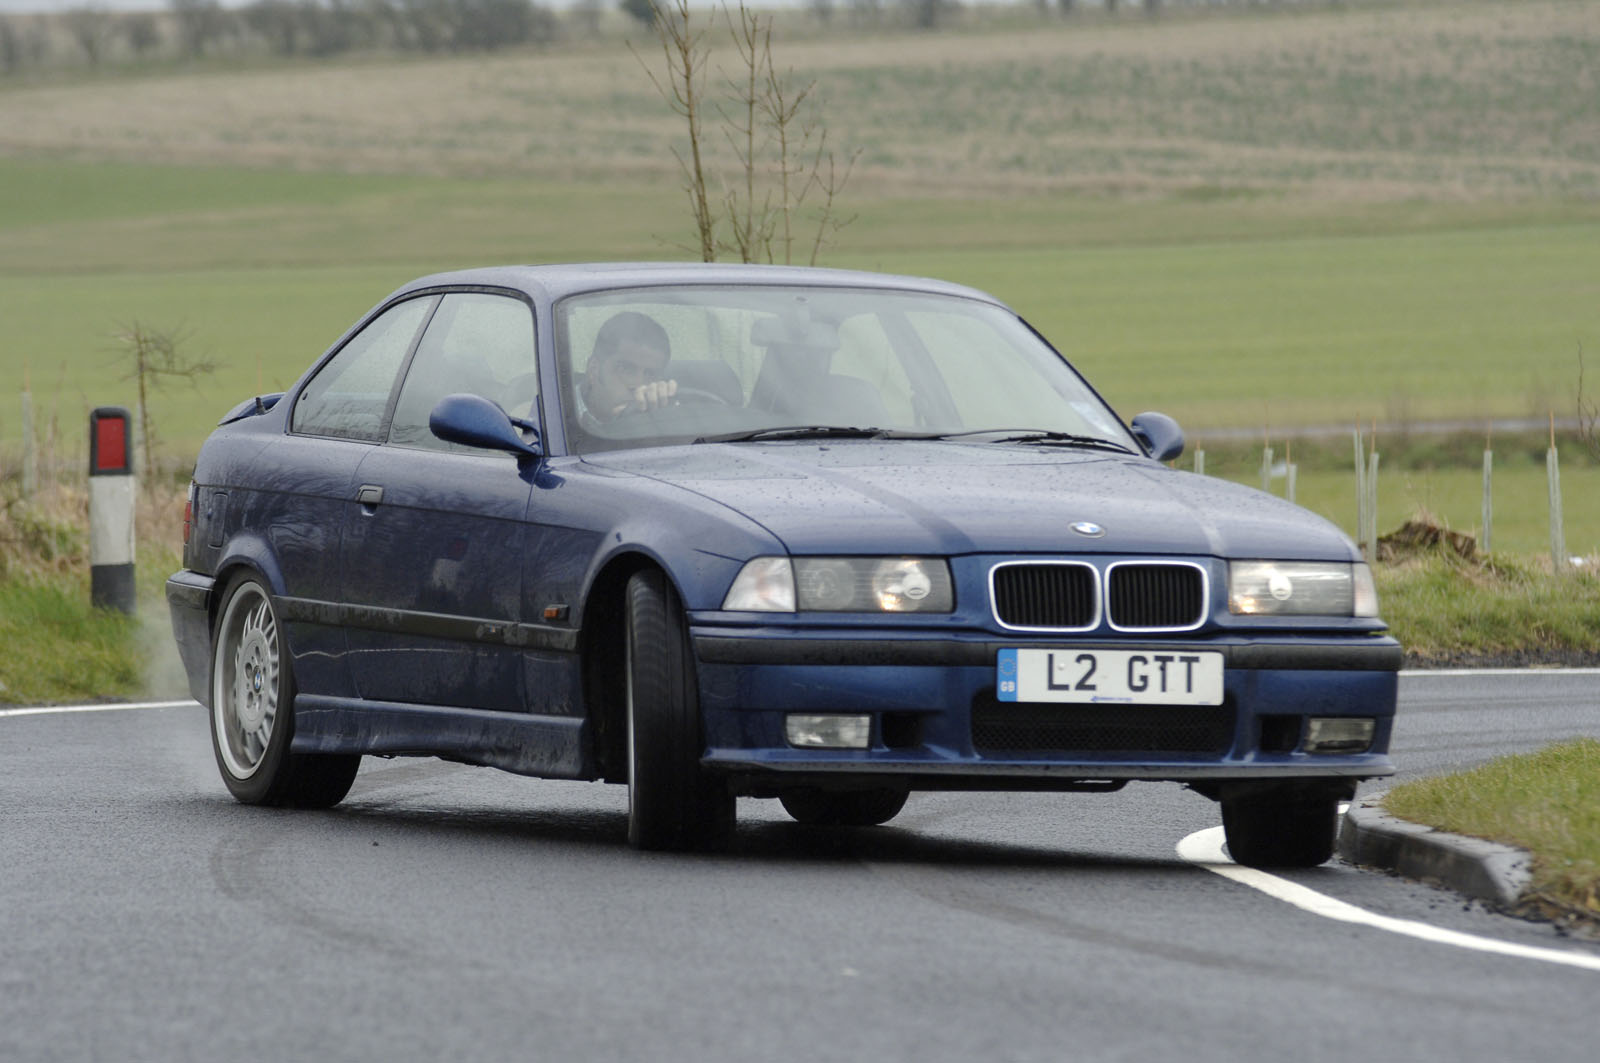 Used car buying guide: BMW M3 E36 (1992-1999)